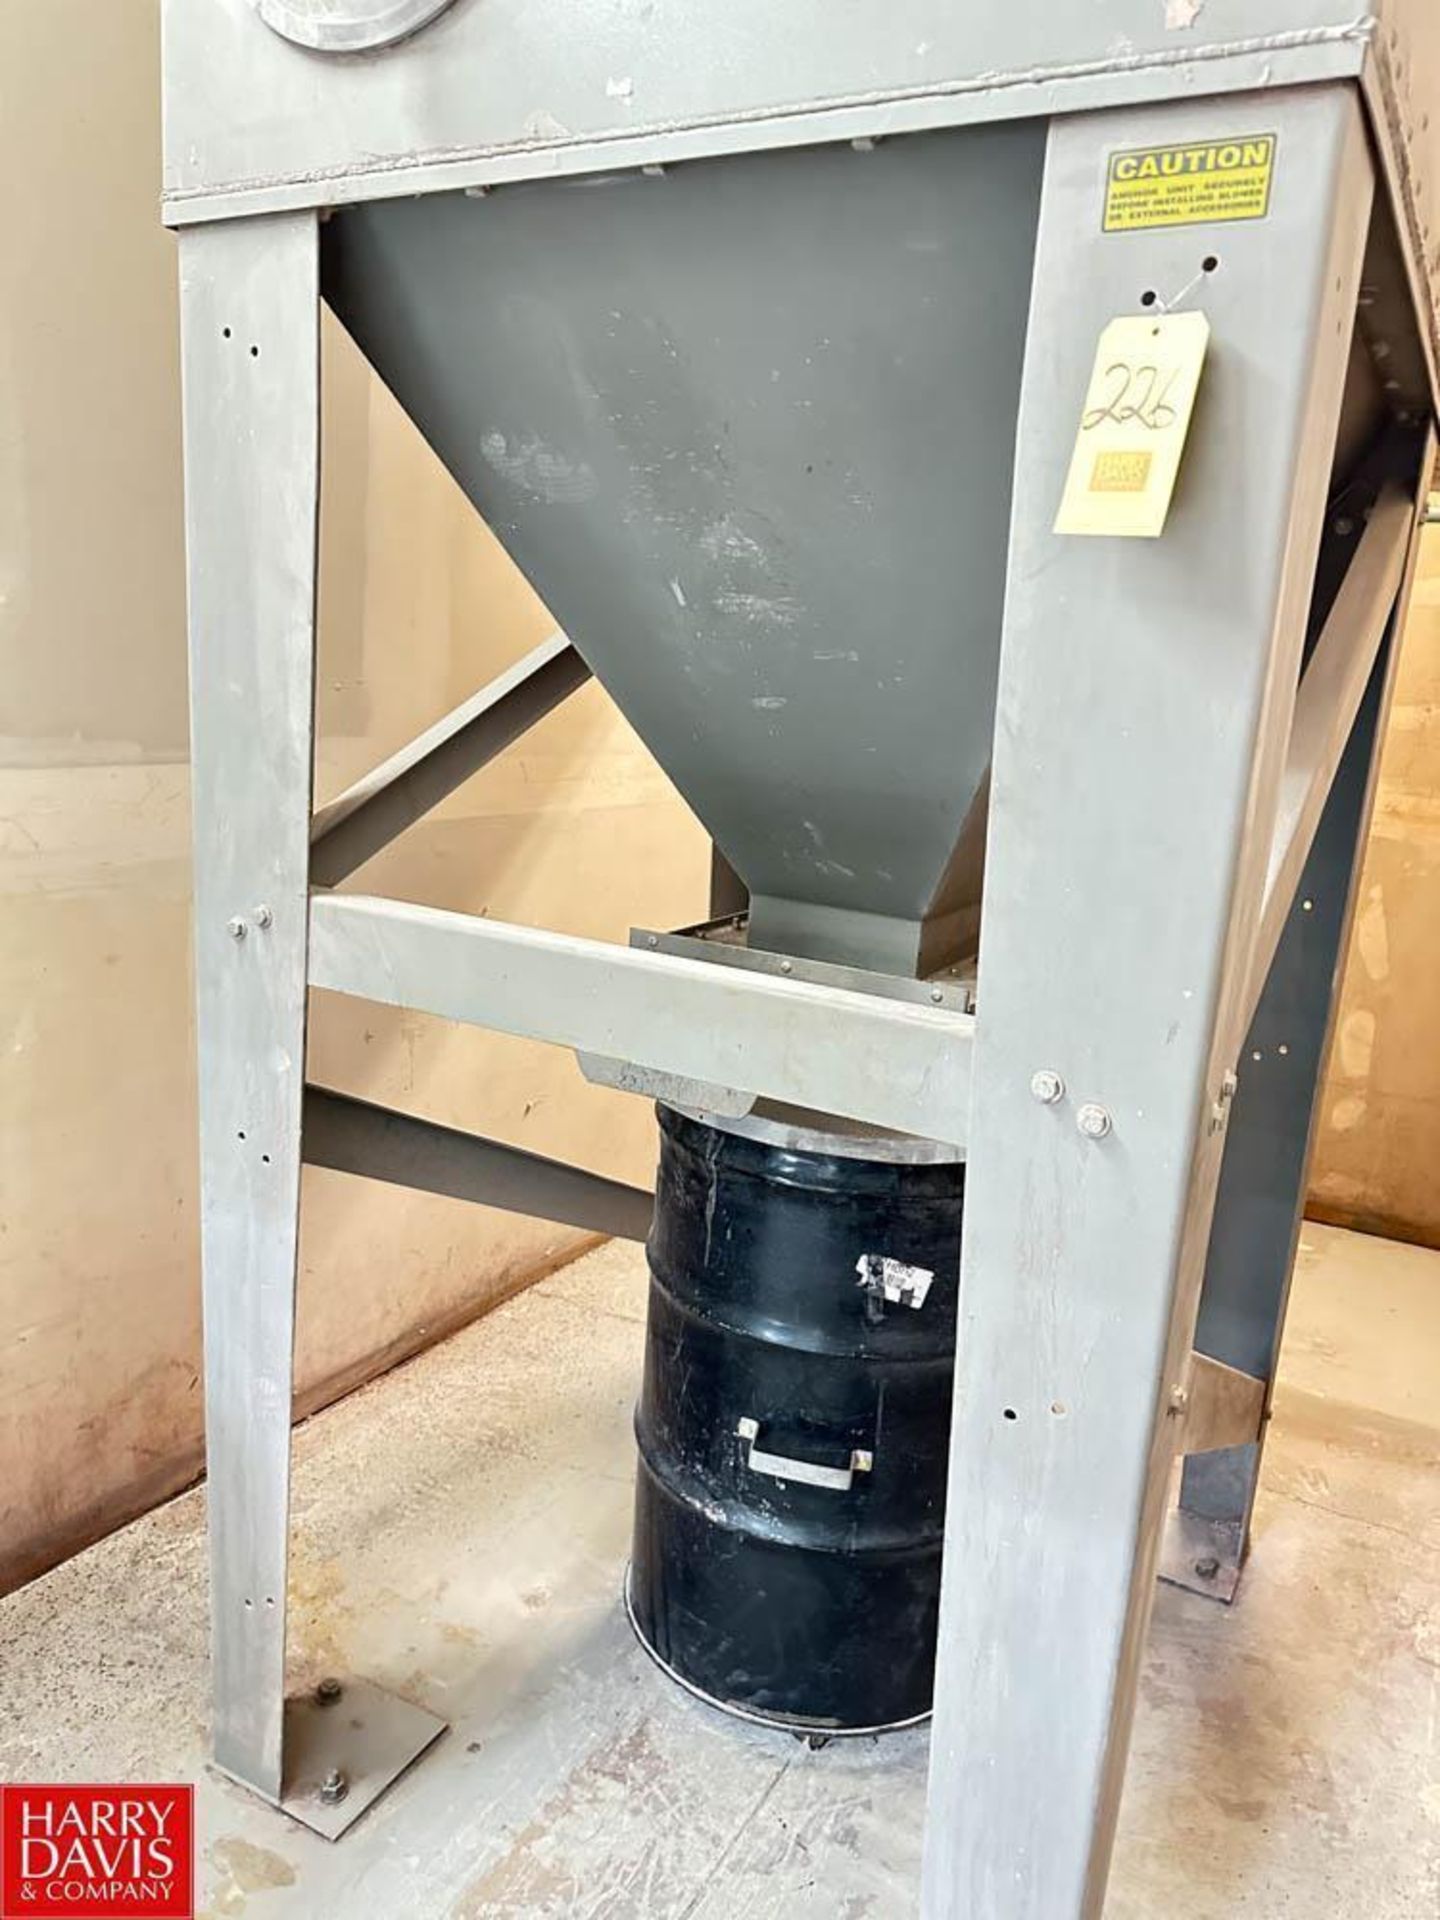 United Air Specialists Dust-Hog Dust Collector, Model: SBD8-2 - Rigging Fee: $850 - Image 3 of 6